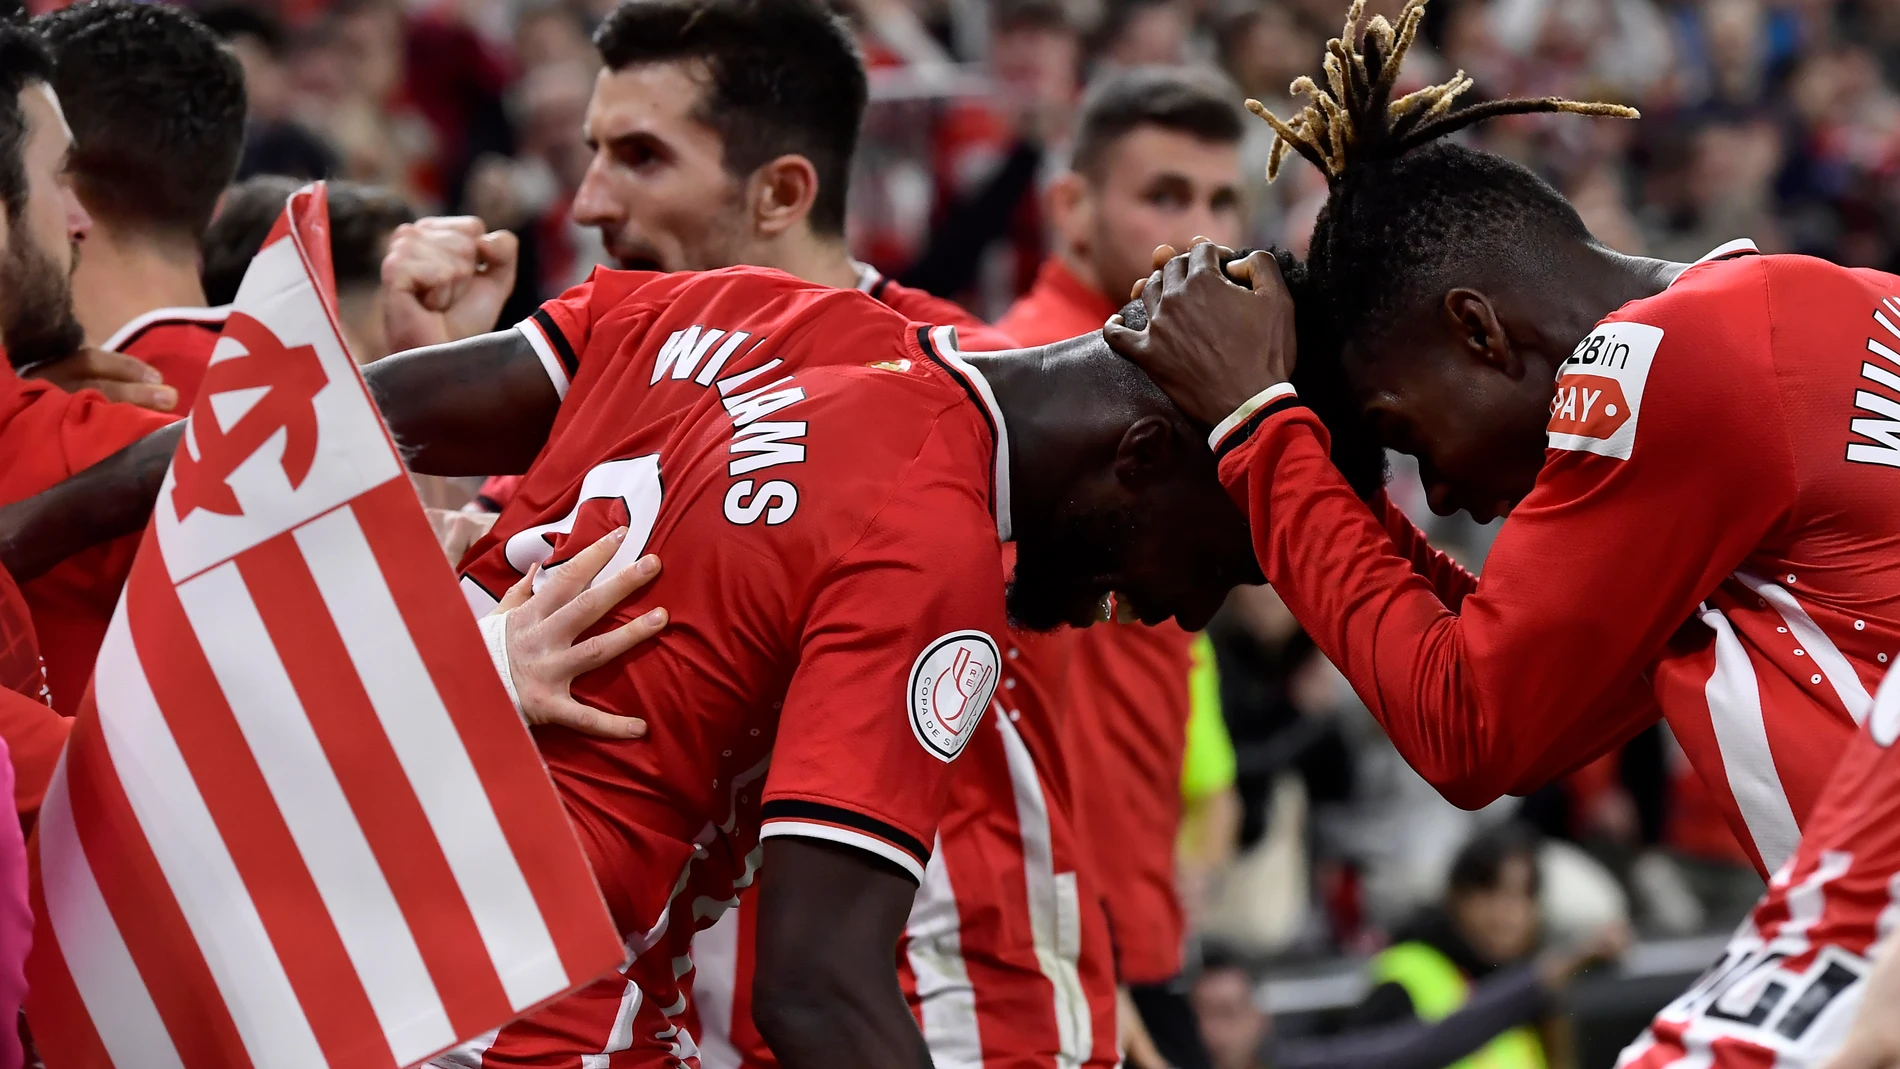 Athletic Bilbao's Inaki Williams celebrates scoring his side's third goal during the Copa del Rey quarterfinals soccer match between Athletic Bilbao and Barcelona at the San Mames stadium in Bilbao, Spain, on Wednesday, Jan. 24, 2024. (AP Photo/Alvaro Barrientos)